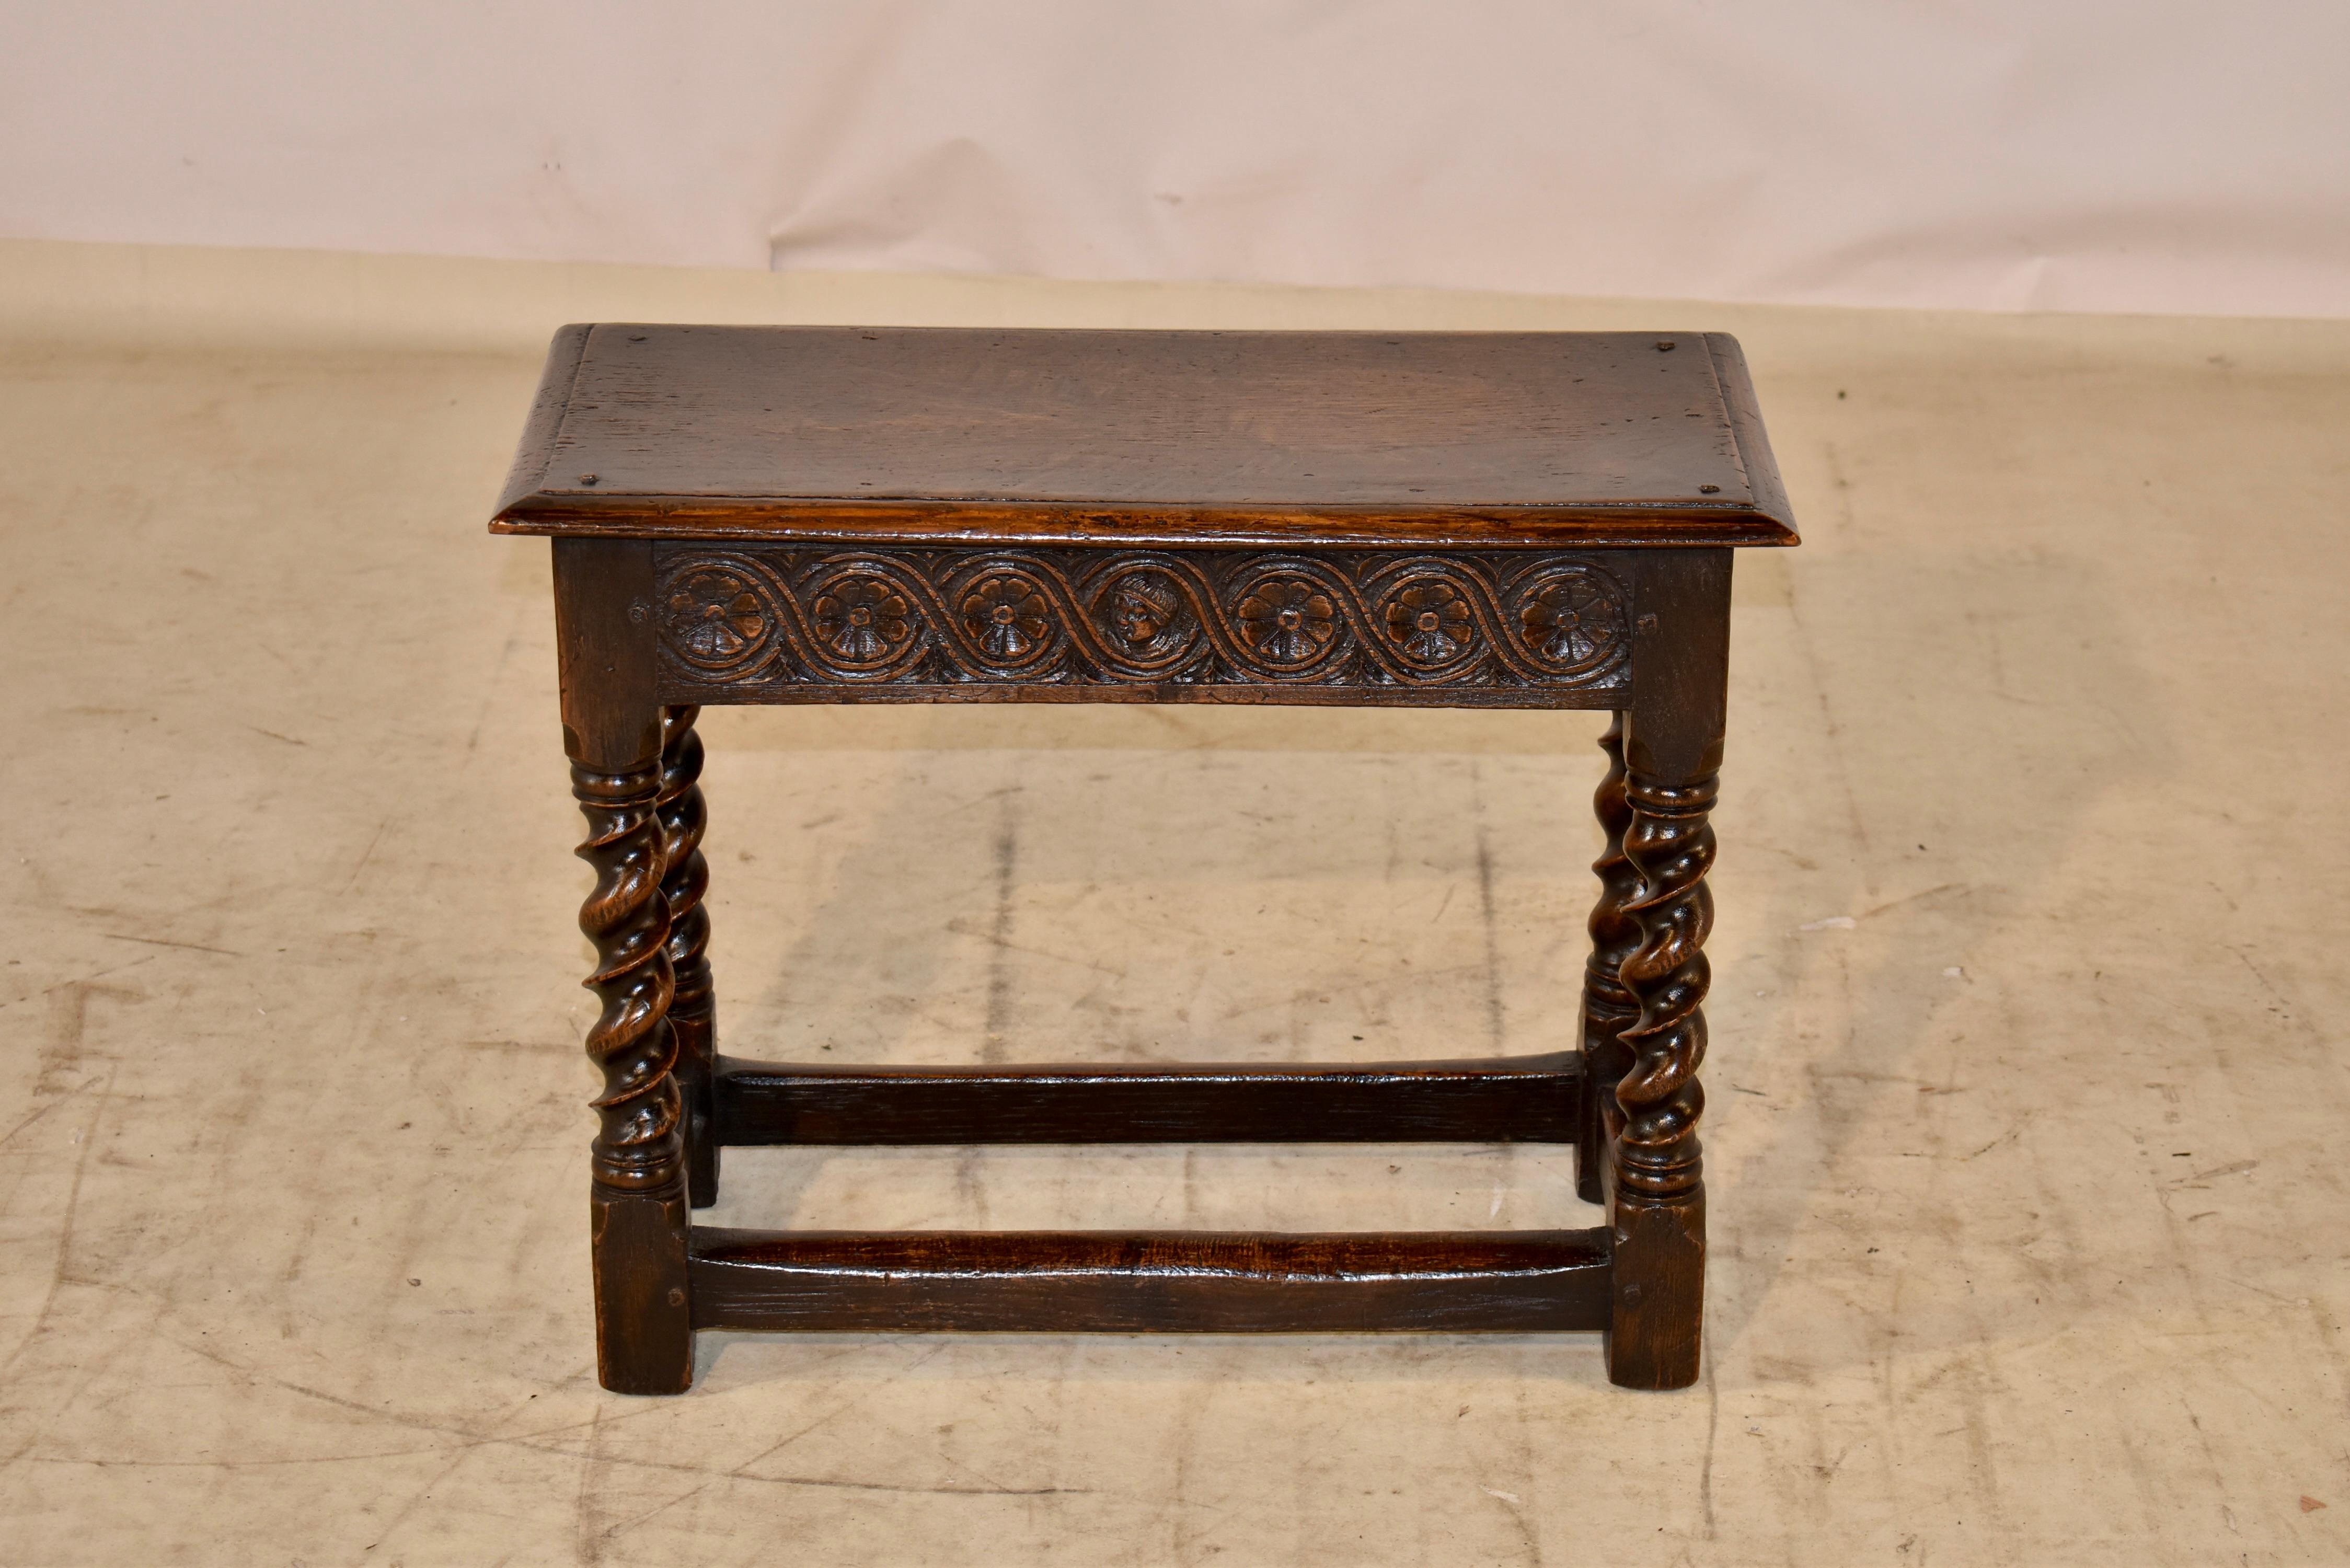 19th century oak joint stool from England with a beveled edge around the single plank seat, which also has pegged construction. The apron is hand carved decorated on all four sides for easy placement in any room. The stool is supported on hand